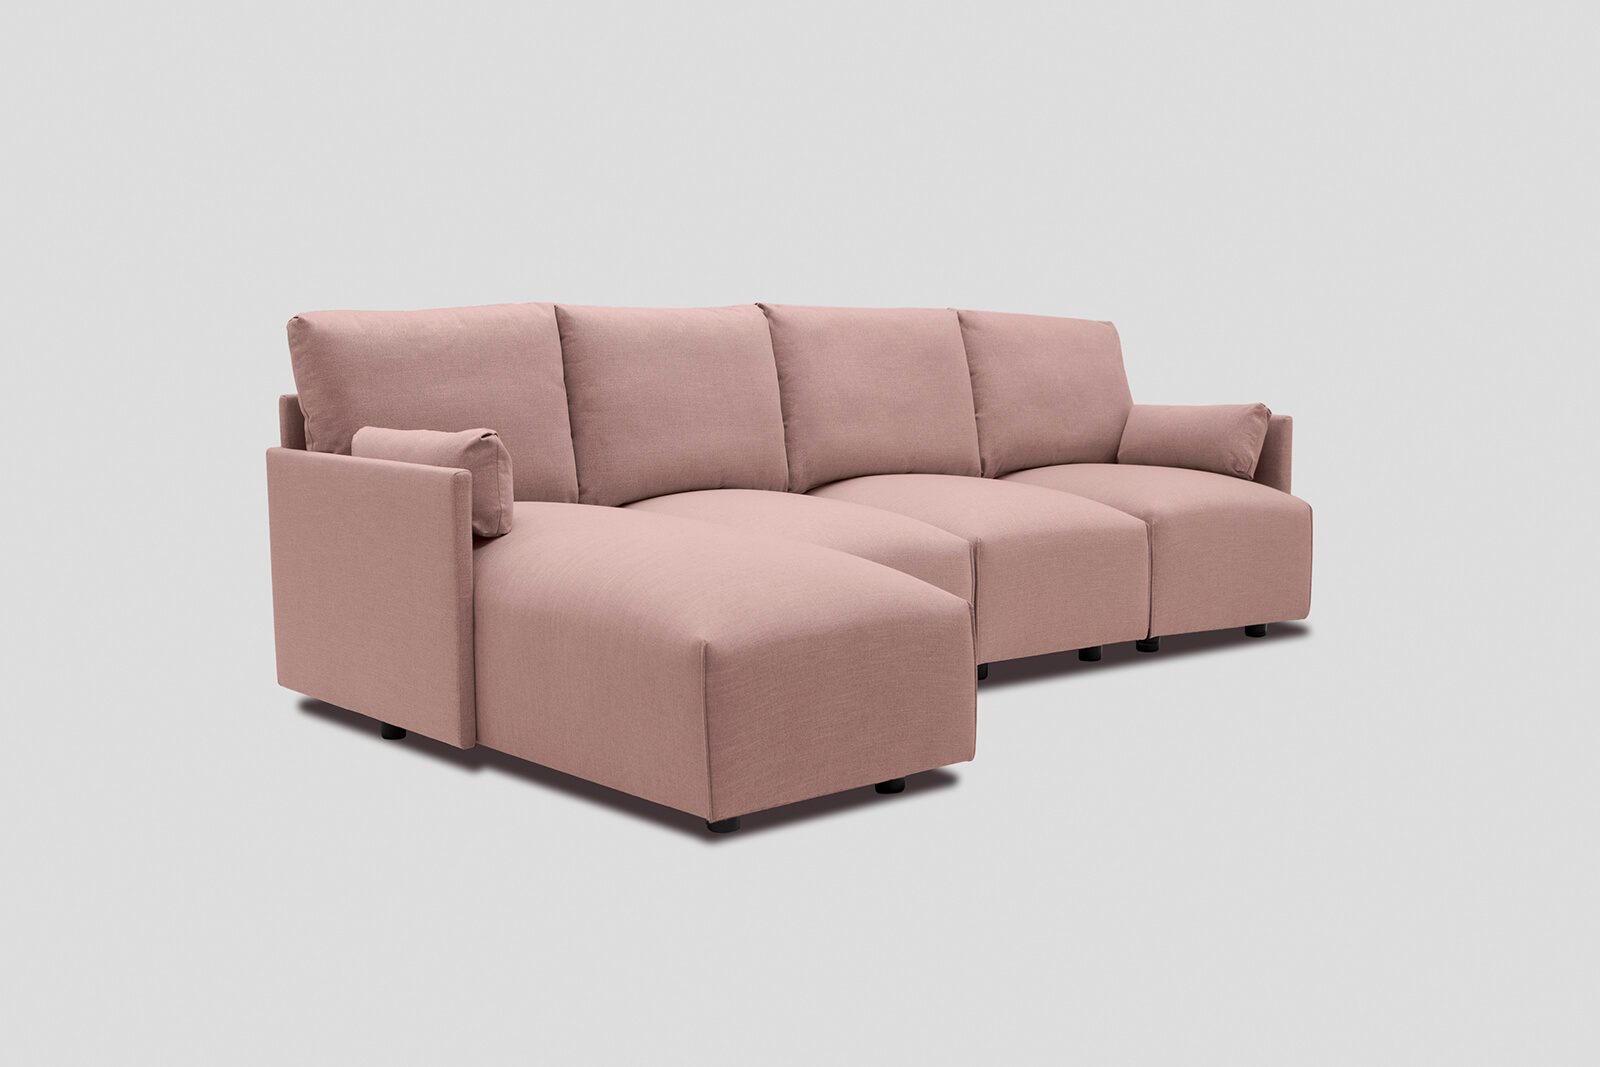 HB04-large-chaise-sofa-rosewater-3q-left